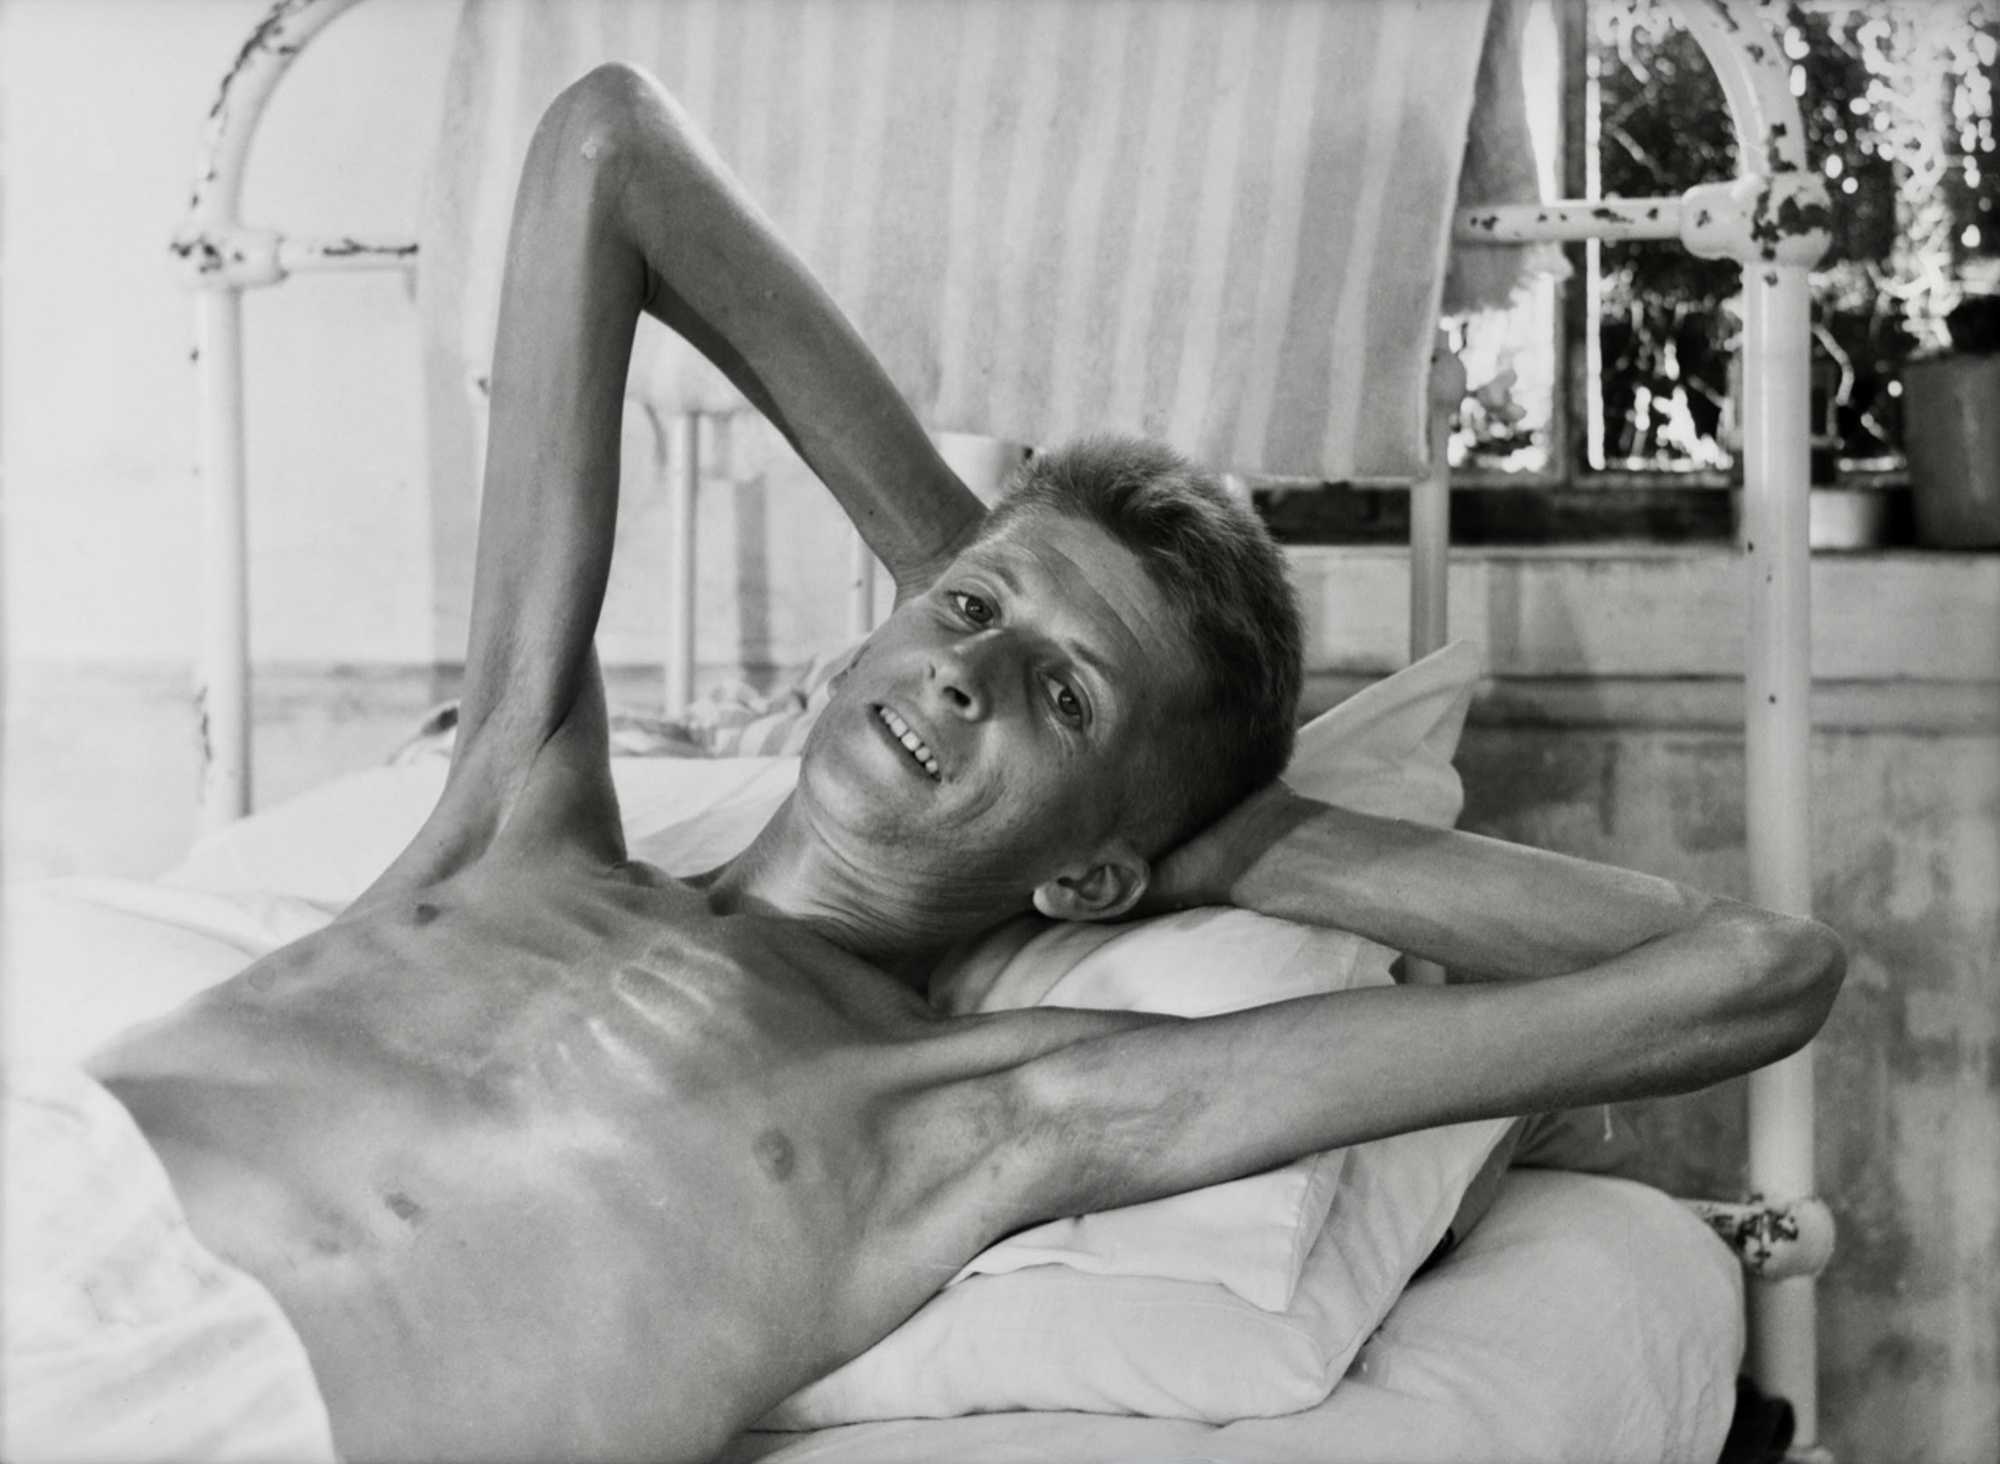 Keith in a hospital in Singapore (staffed by Australian personnel), 20 September 1945